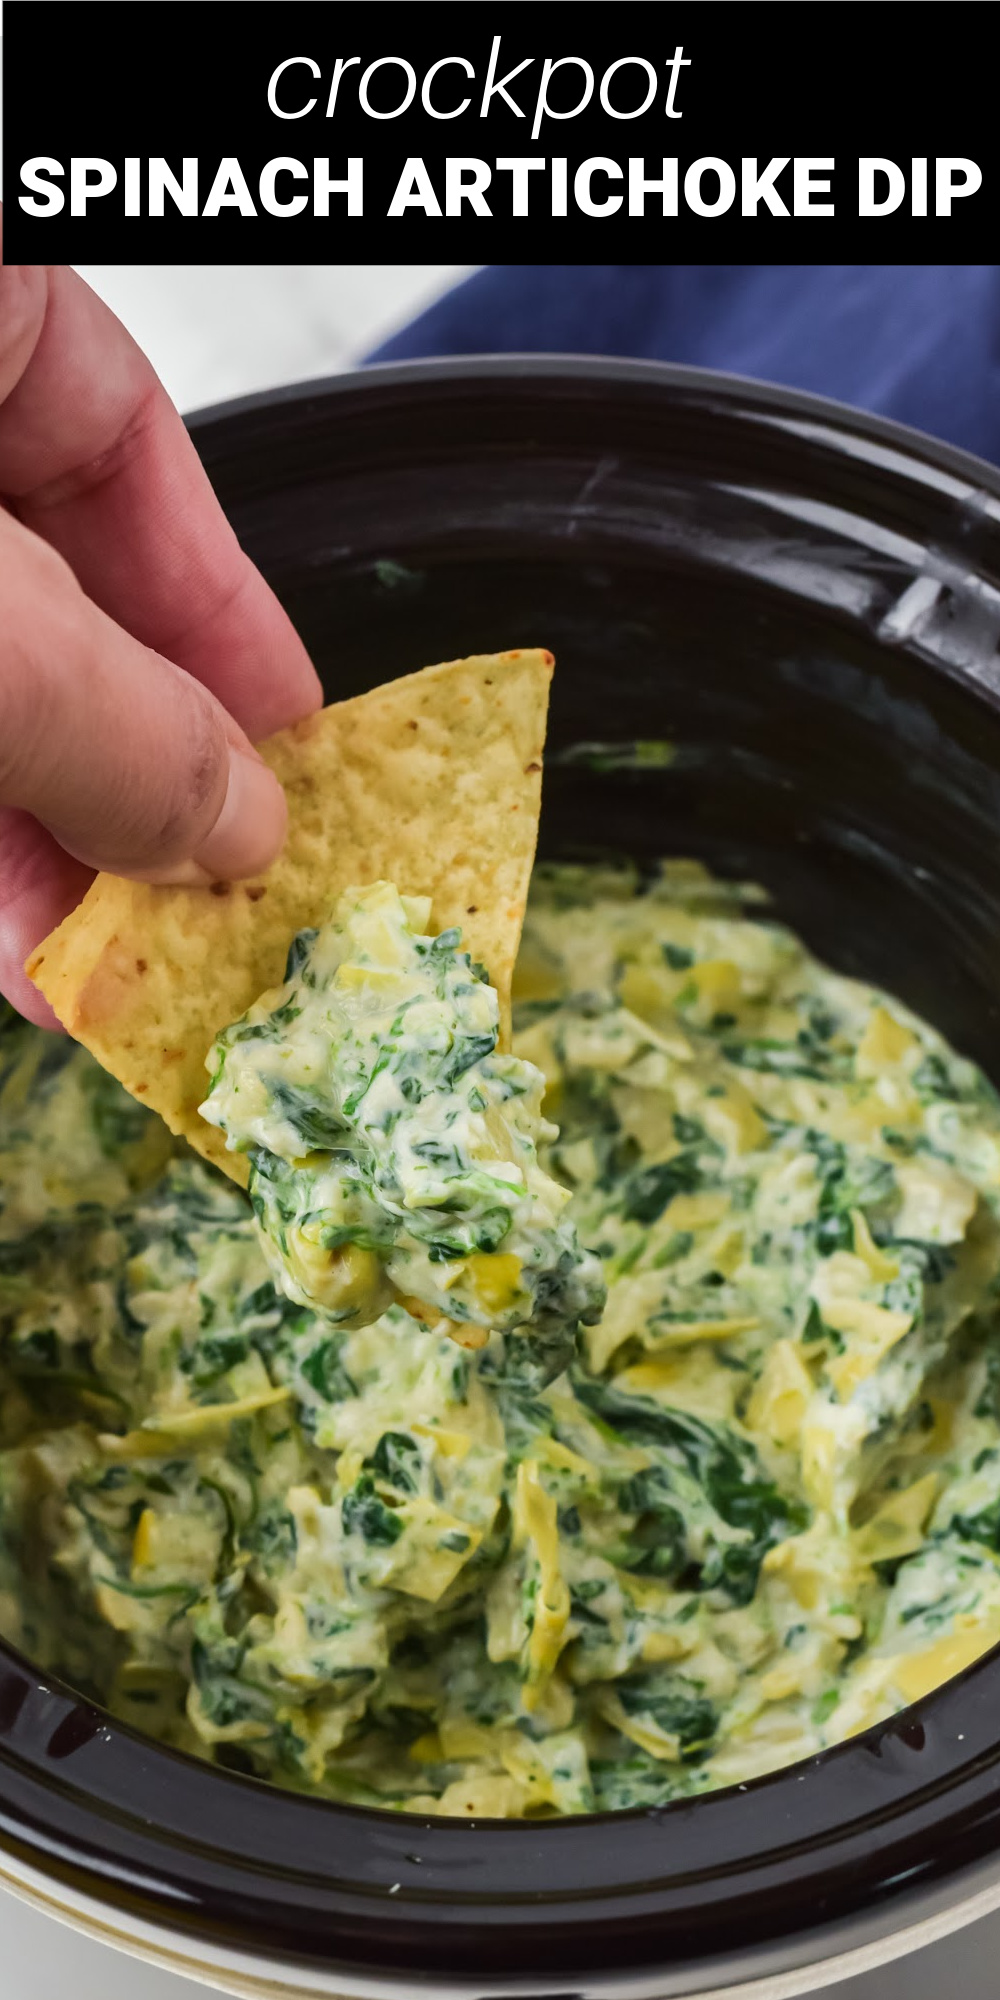 If you're looking for an insanely easy and delicious dip recipe, this warm and cheesy Crockpot Spinach Artichoke Dip is it! It's the ultimate game day or party appetizer that can easily be made in advance!